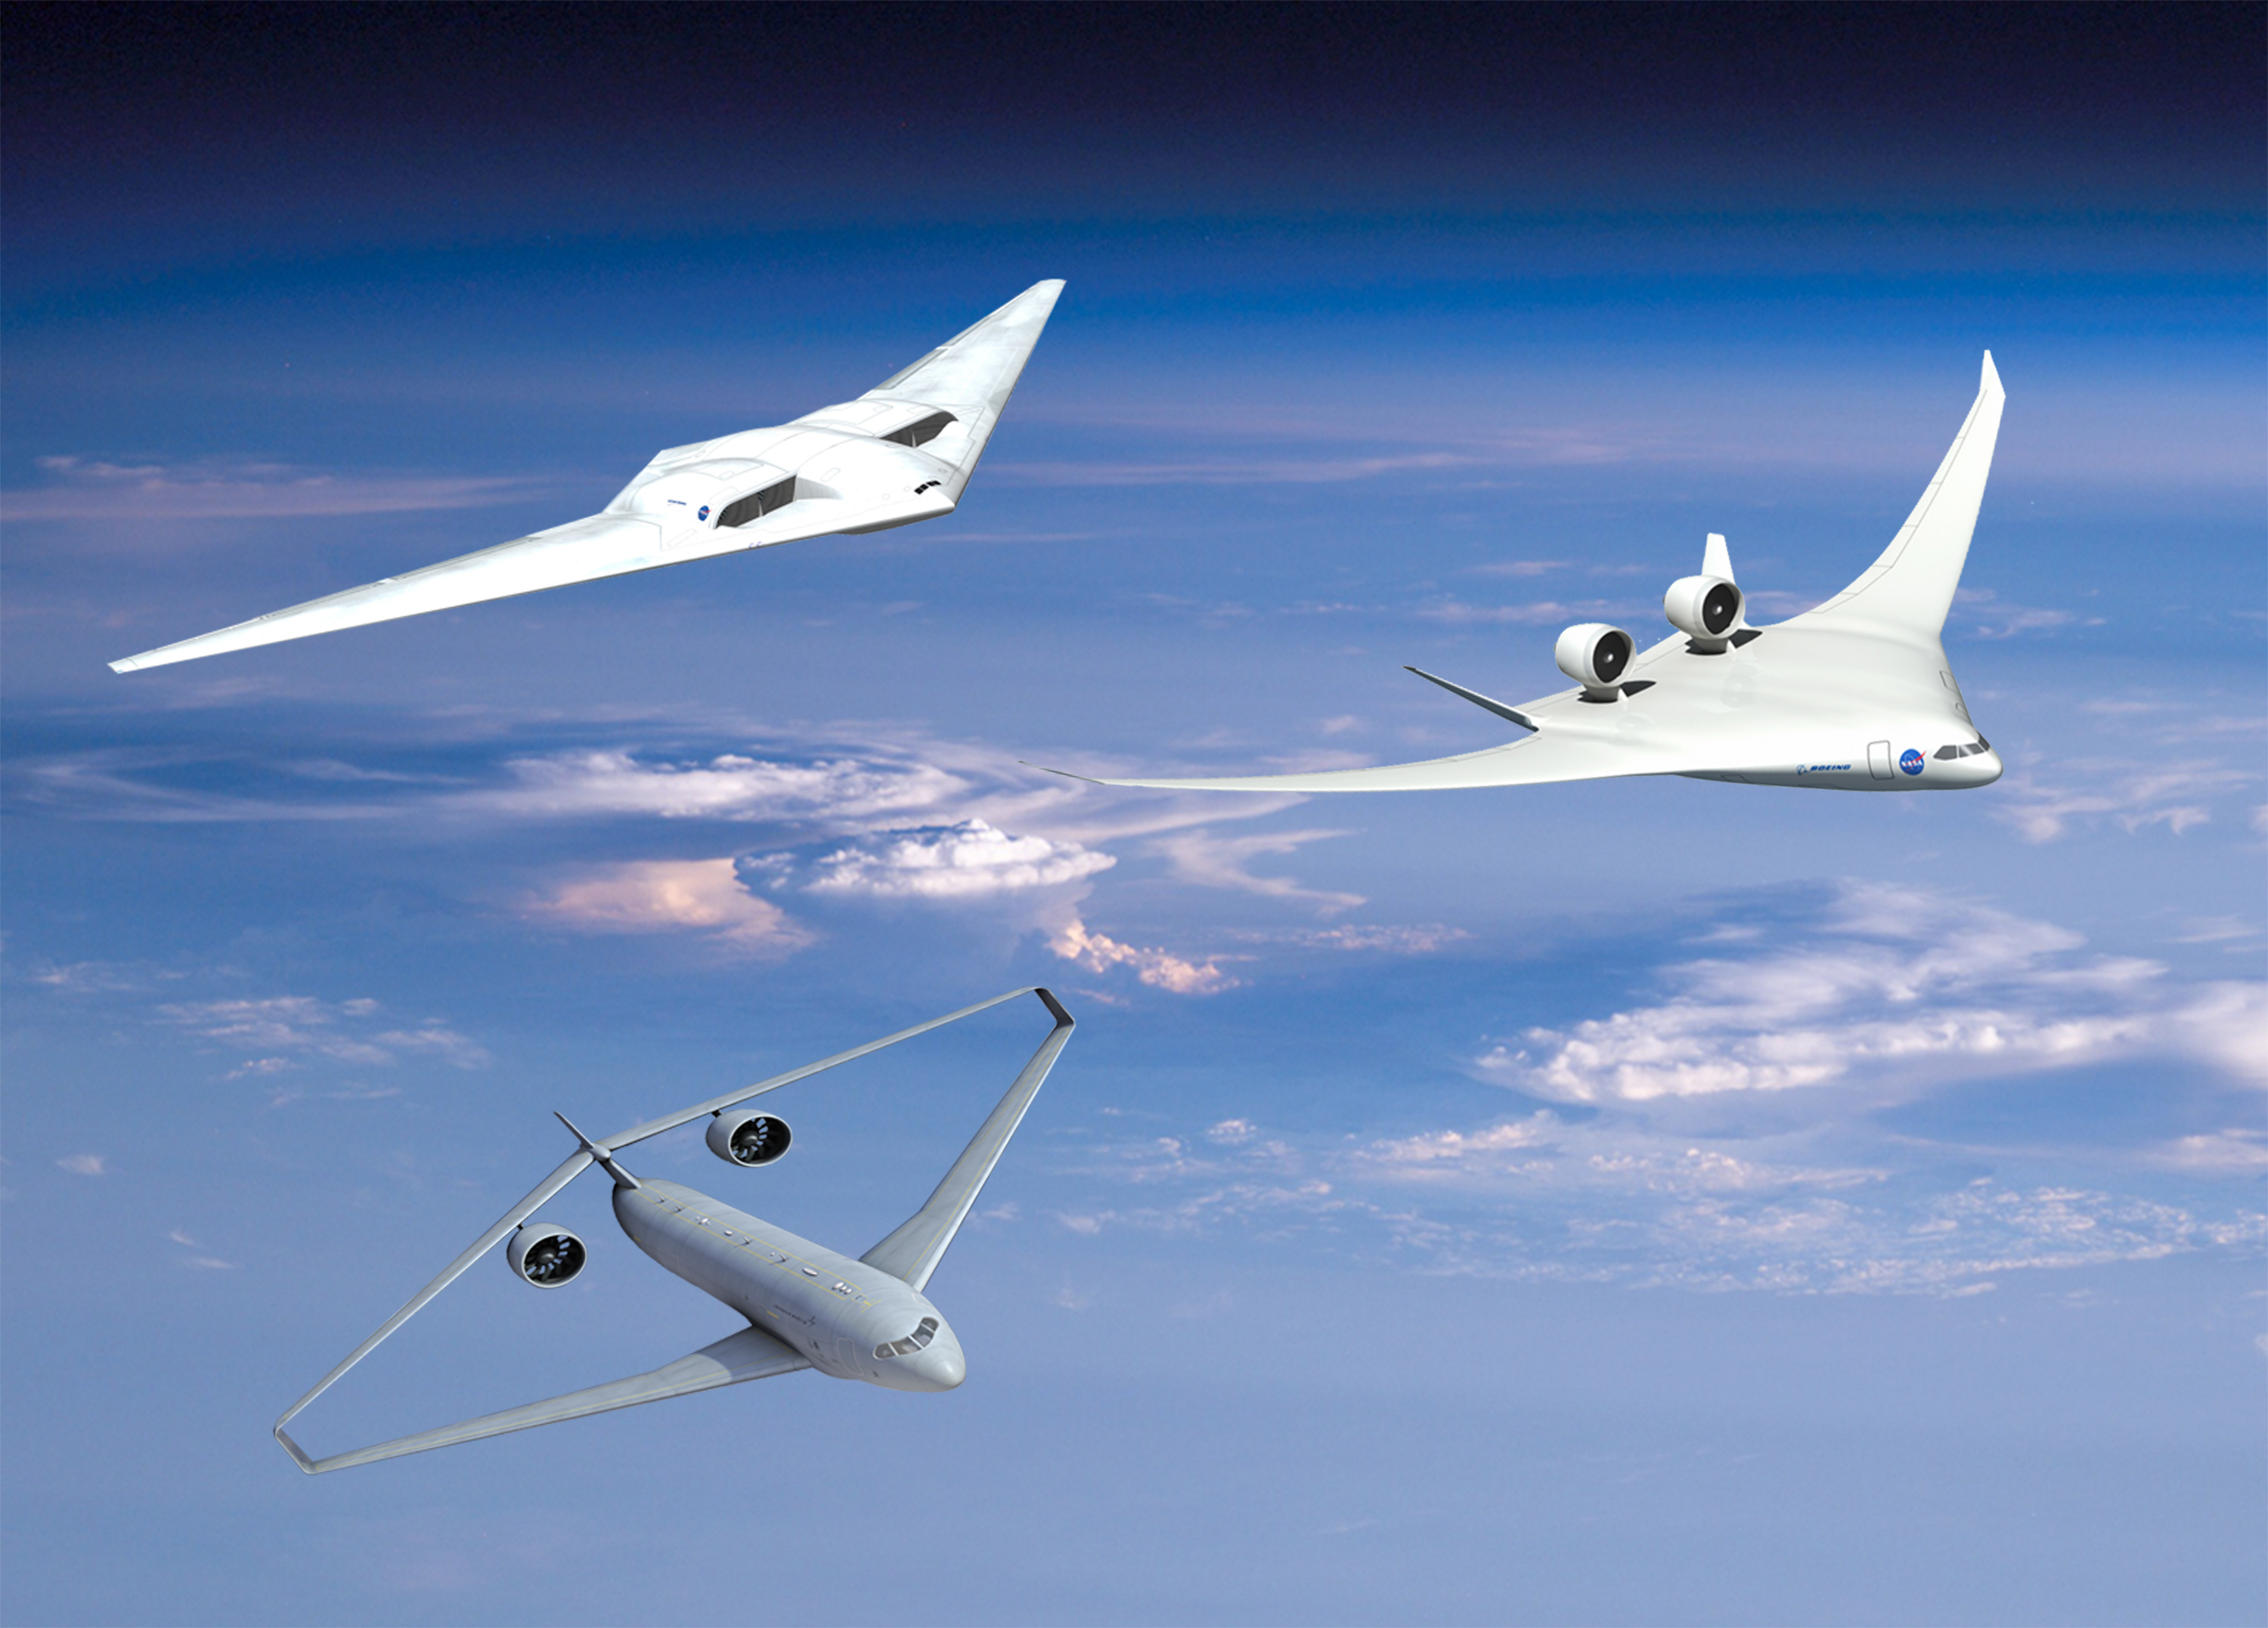 Three artist concept vehicles flying in the sky in formation.